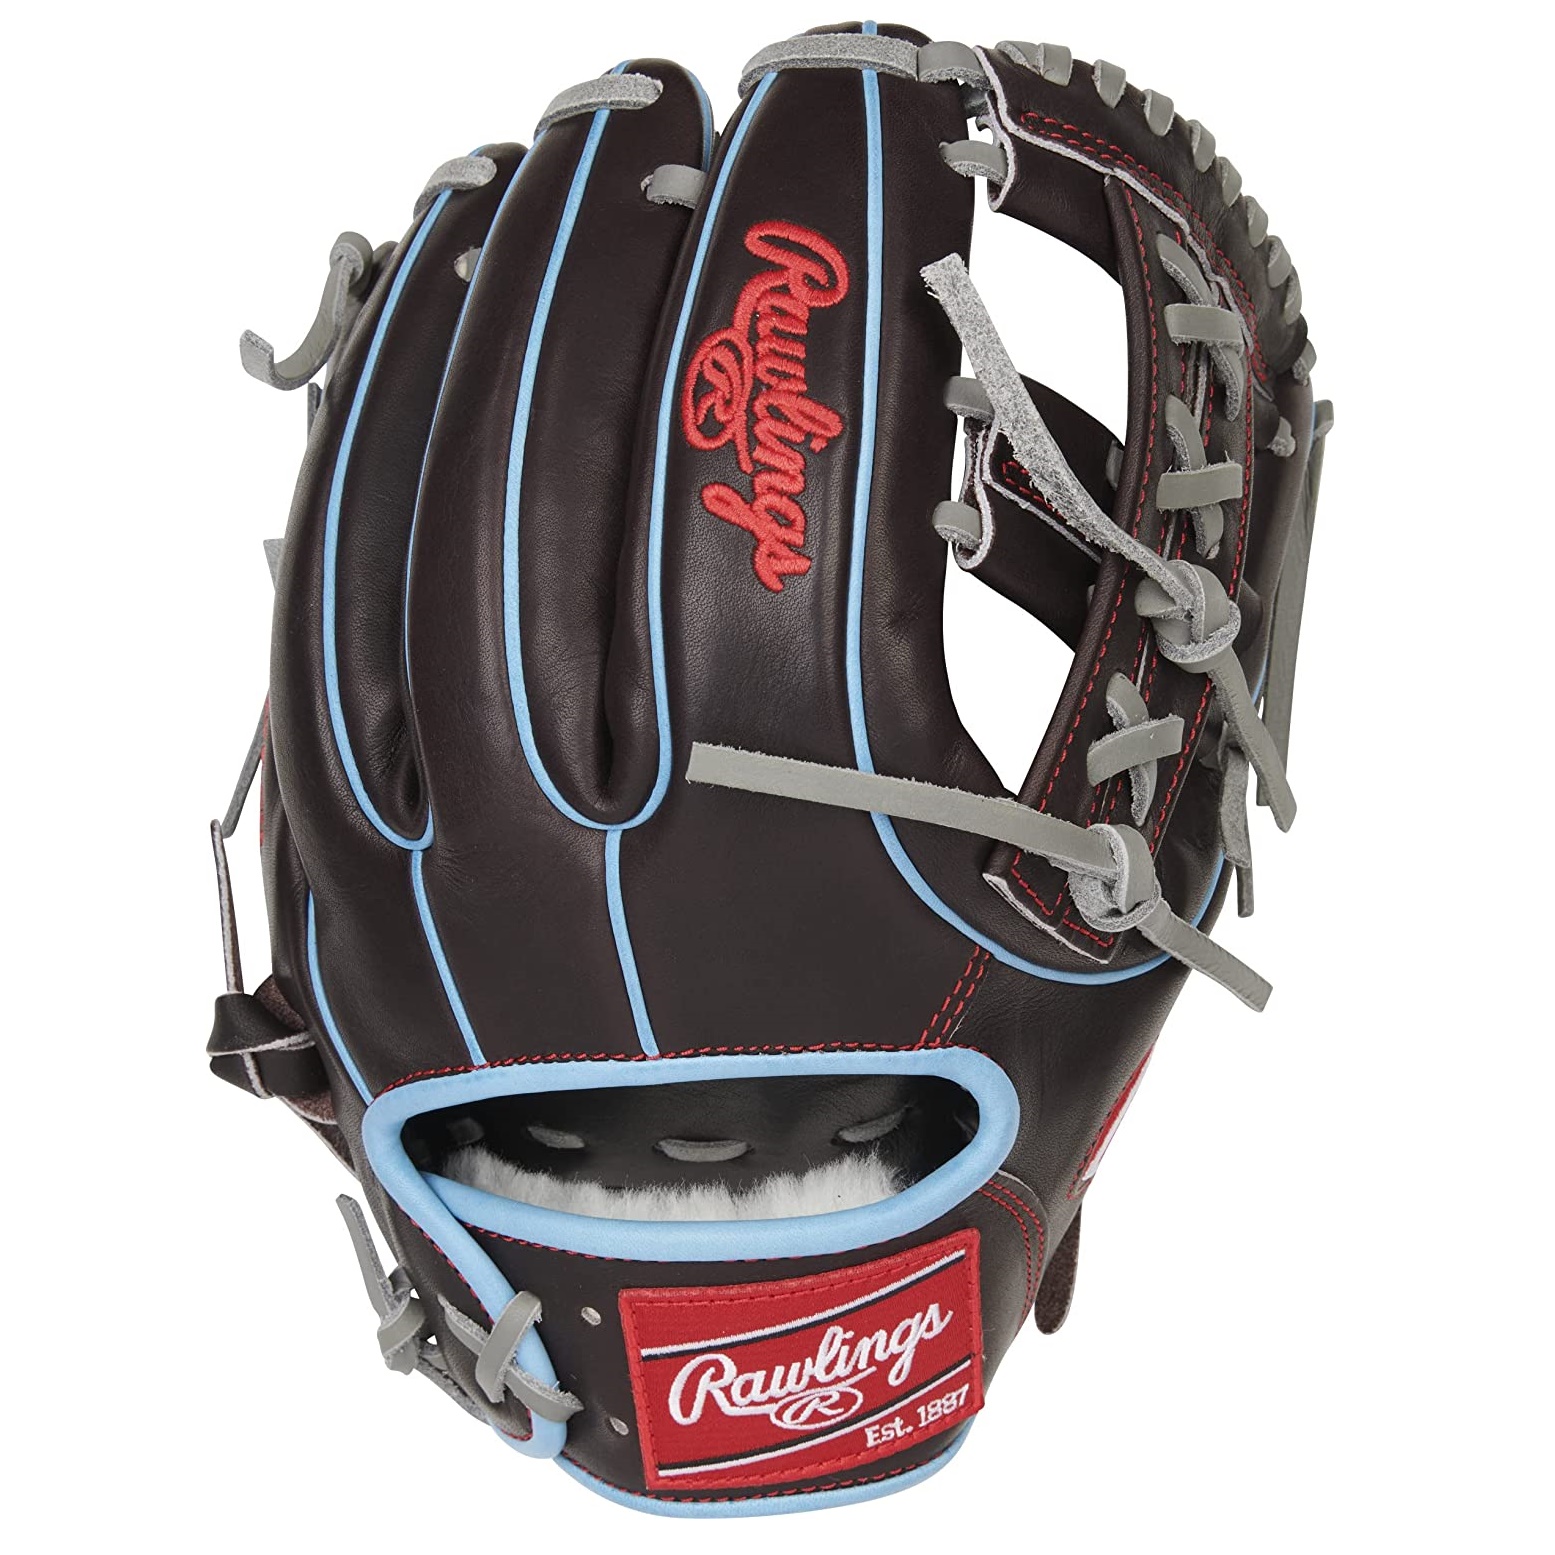 rawlings-pro-preferred-baseball-glove-11-5-single-post-right-hand-throw PROS314-32MO-RightHandThrow Rawlings  <p><span>The Pro Preferred line of baseball gloves from Rawlings are known